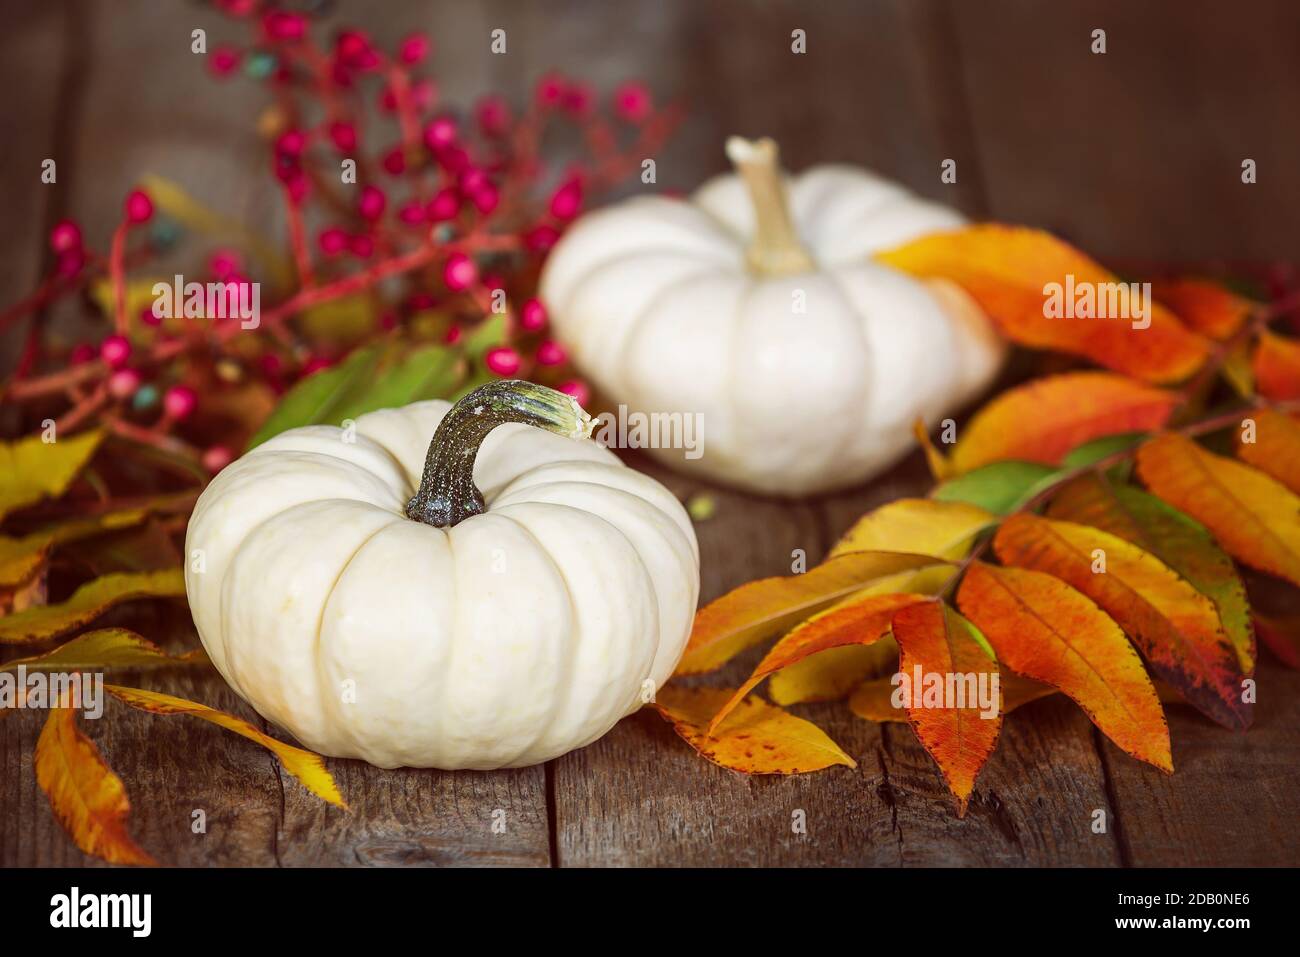 White Mini pumpkins on rustic wooden table. Displayed with colorful autumn leaves and red berries. Stock Photo